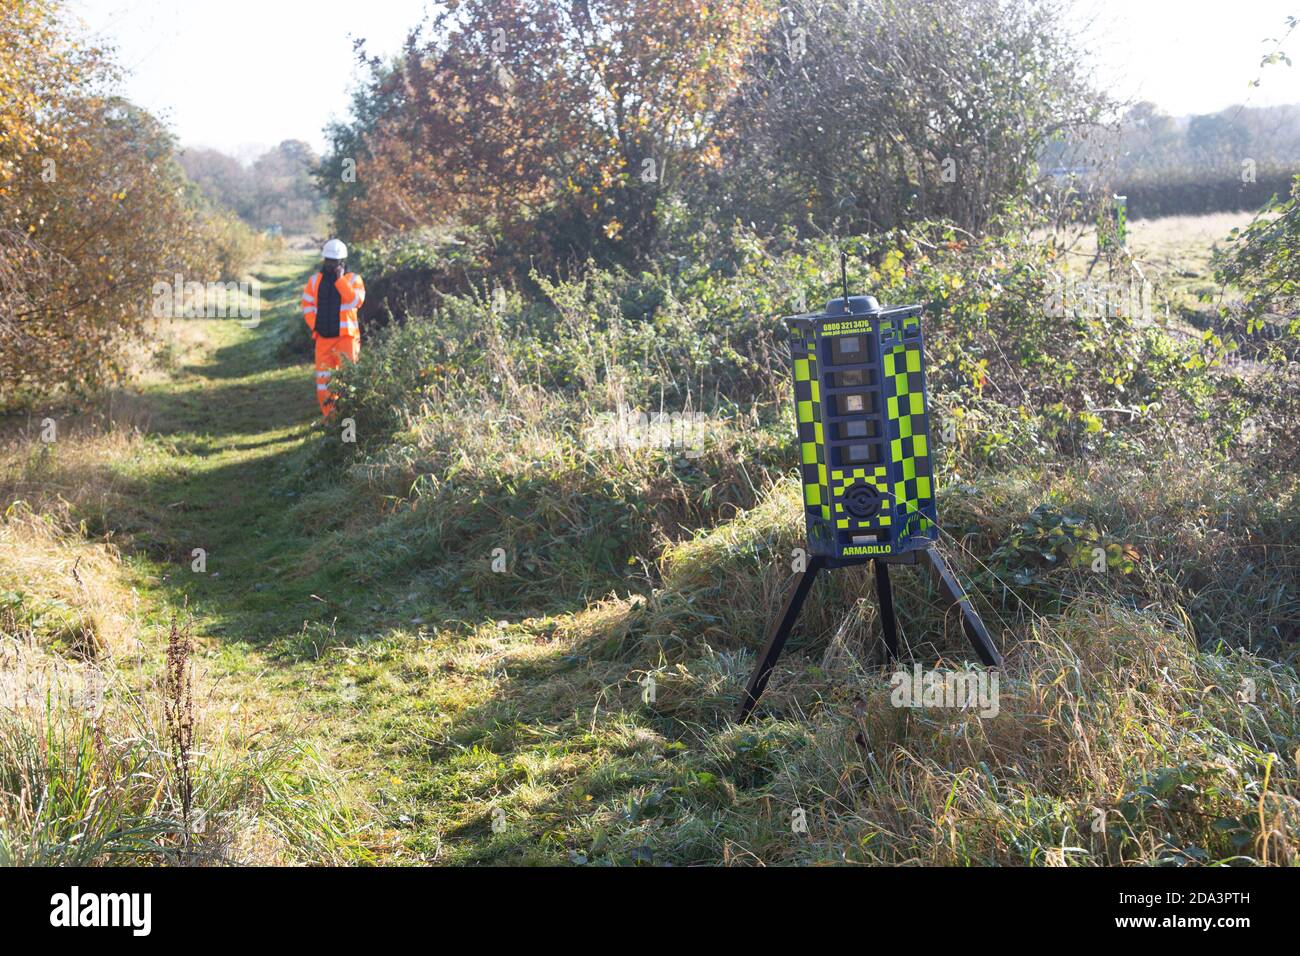 Armadillo Videoguard surveillance equipment used to observe detect protestors at HS2 protest site, Kenilworth, Warwickshire, England, UK security guar Stock Photo